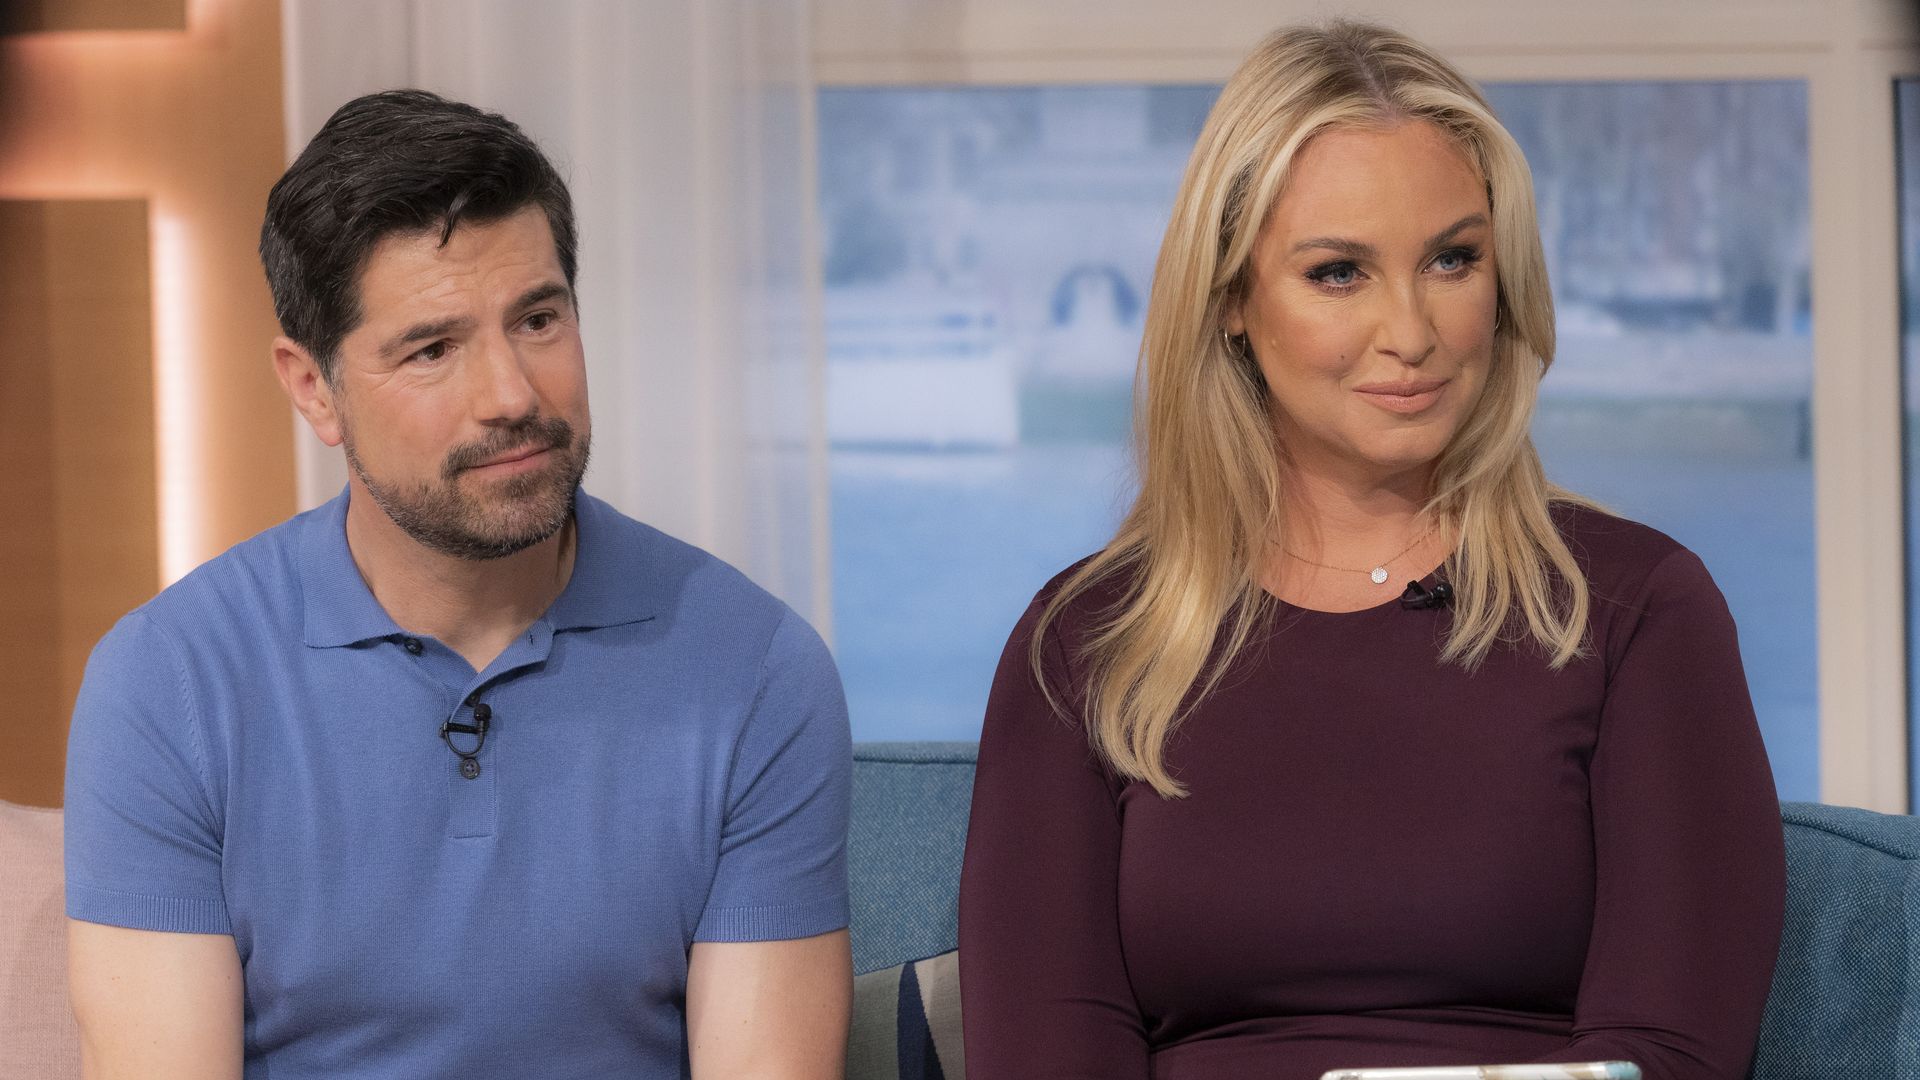 Craig Doyle and Josie Gibson host This Morning